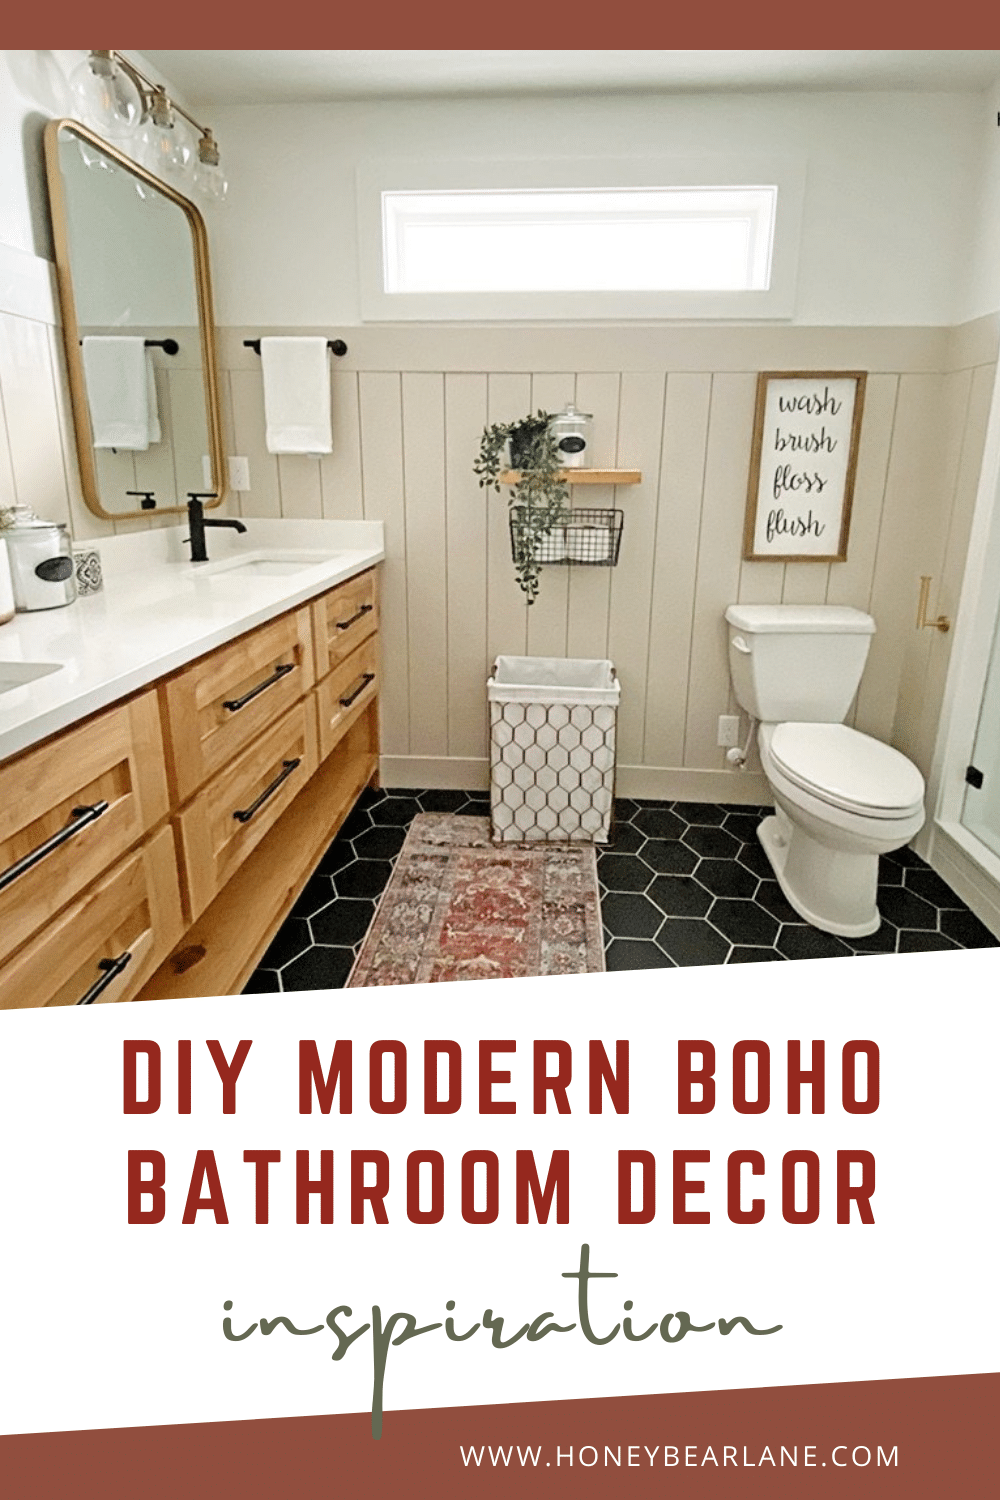 With the bohemian style coming back, it's so fun to decorate a bathroom this way! Check out my diy modern boho bathroom and all the details for inspiration. Modern boho interior design bathroom. Modern bathroom ideas. Bathroom decor inspiration.